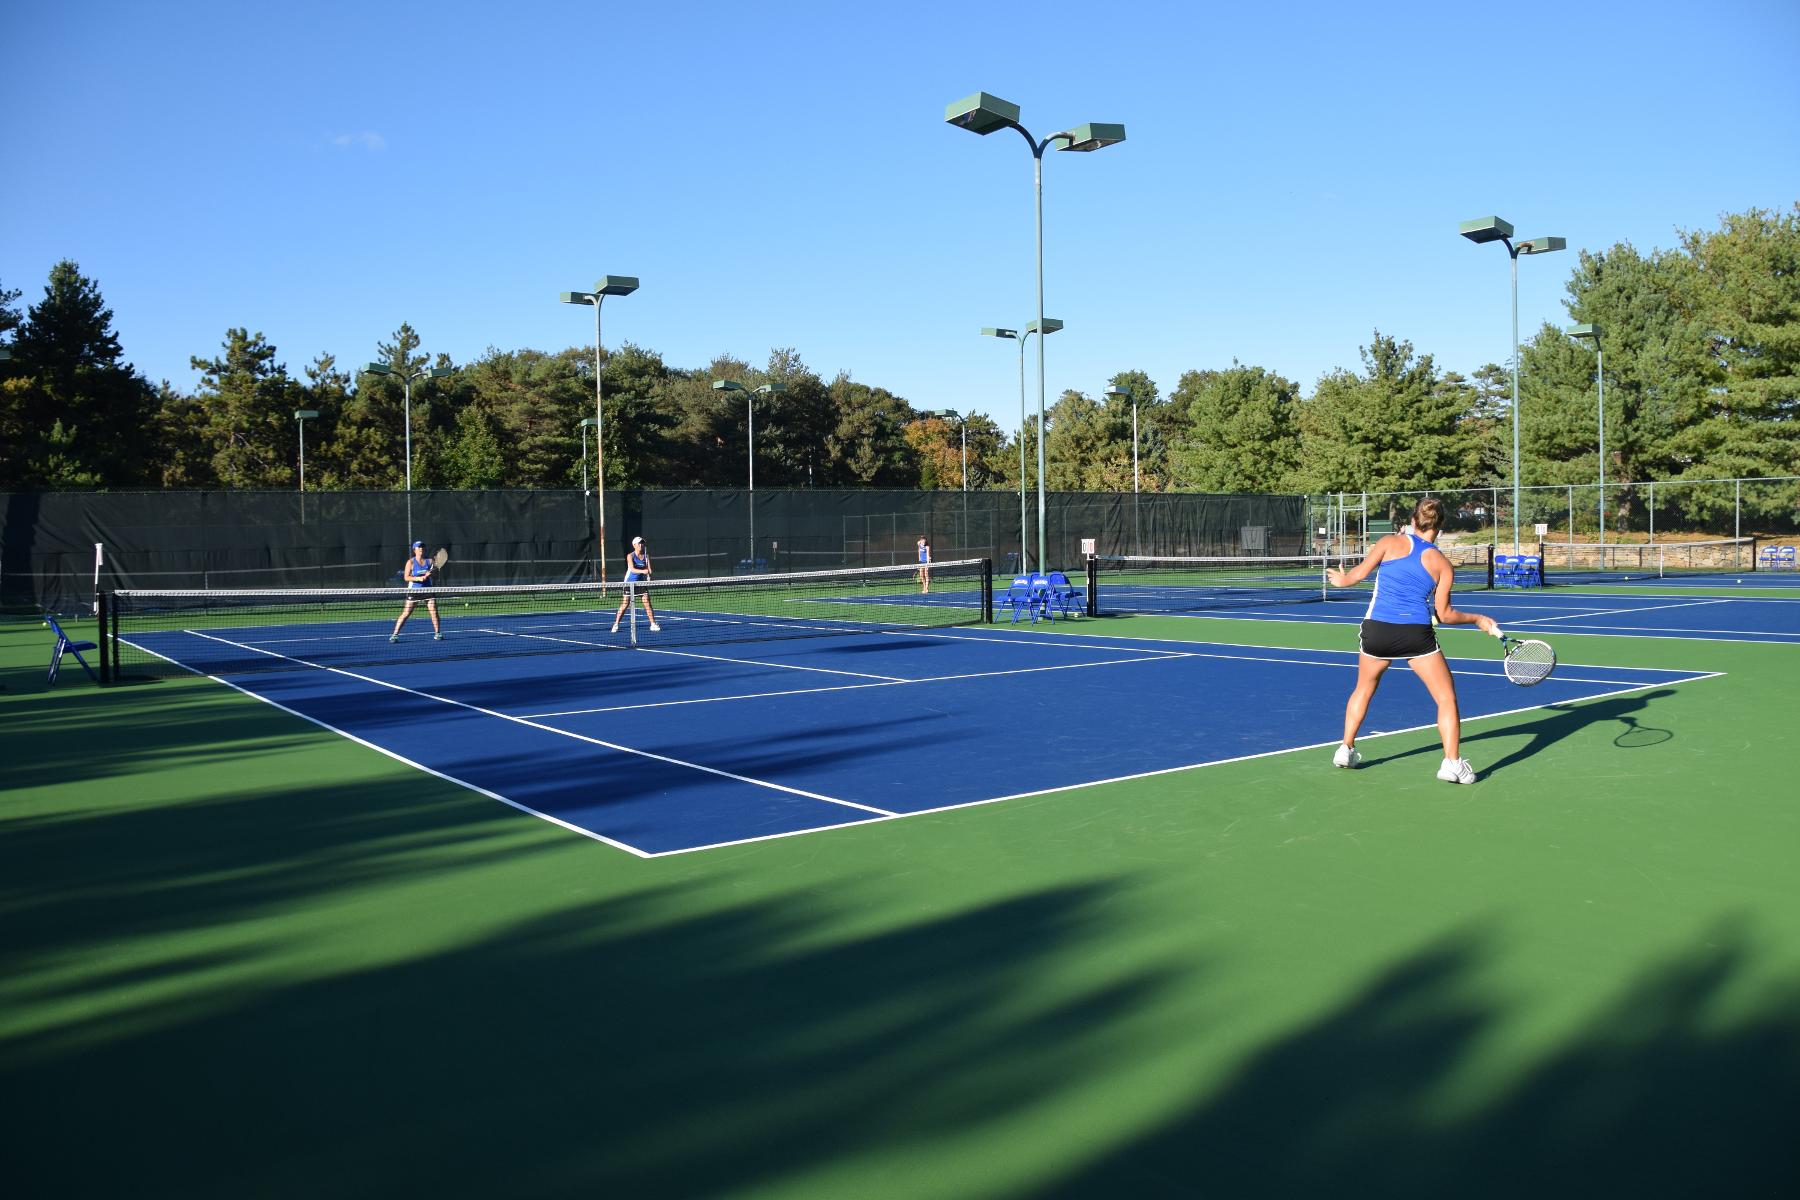 Panoramic view of outdoor tennis courts with athlete in the foreground hitting from the baseline 